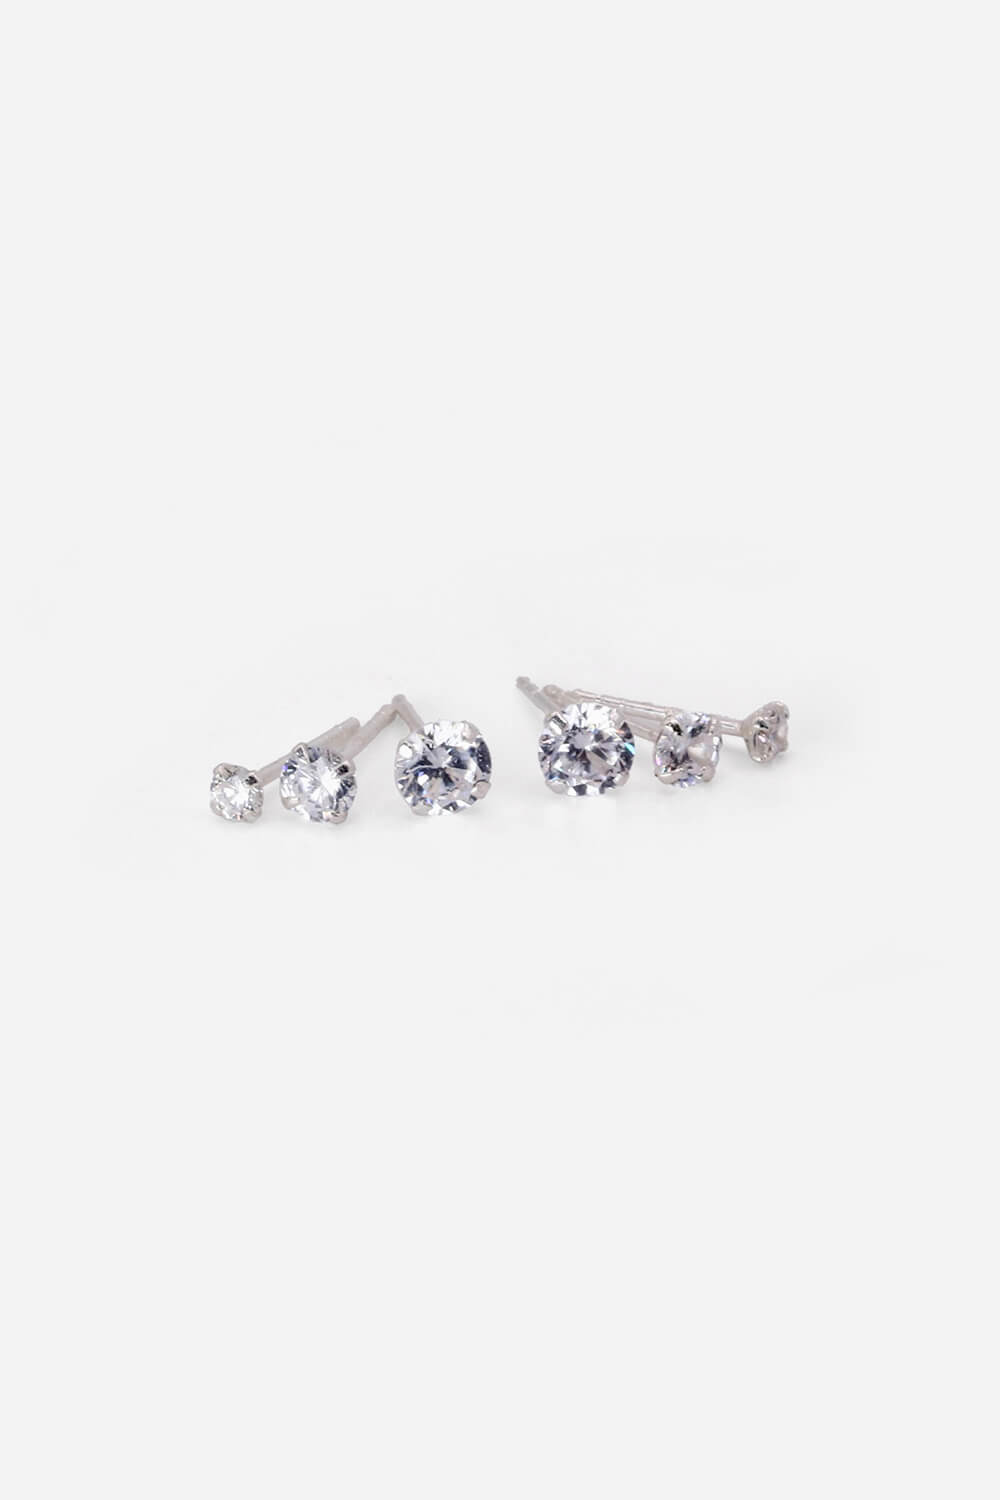 Sterling Silver Cubic Zirconia Stud Earring Set , Image 2 of 4